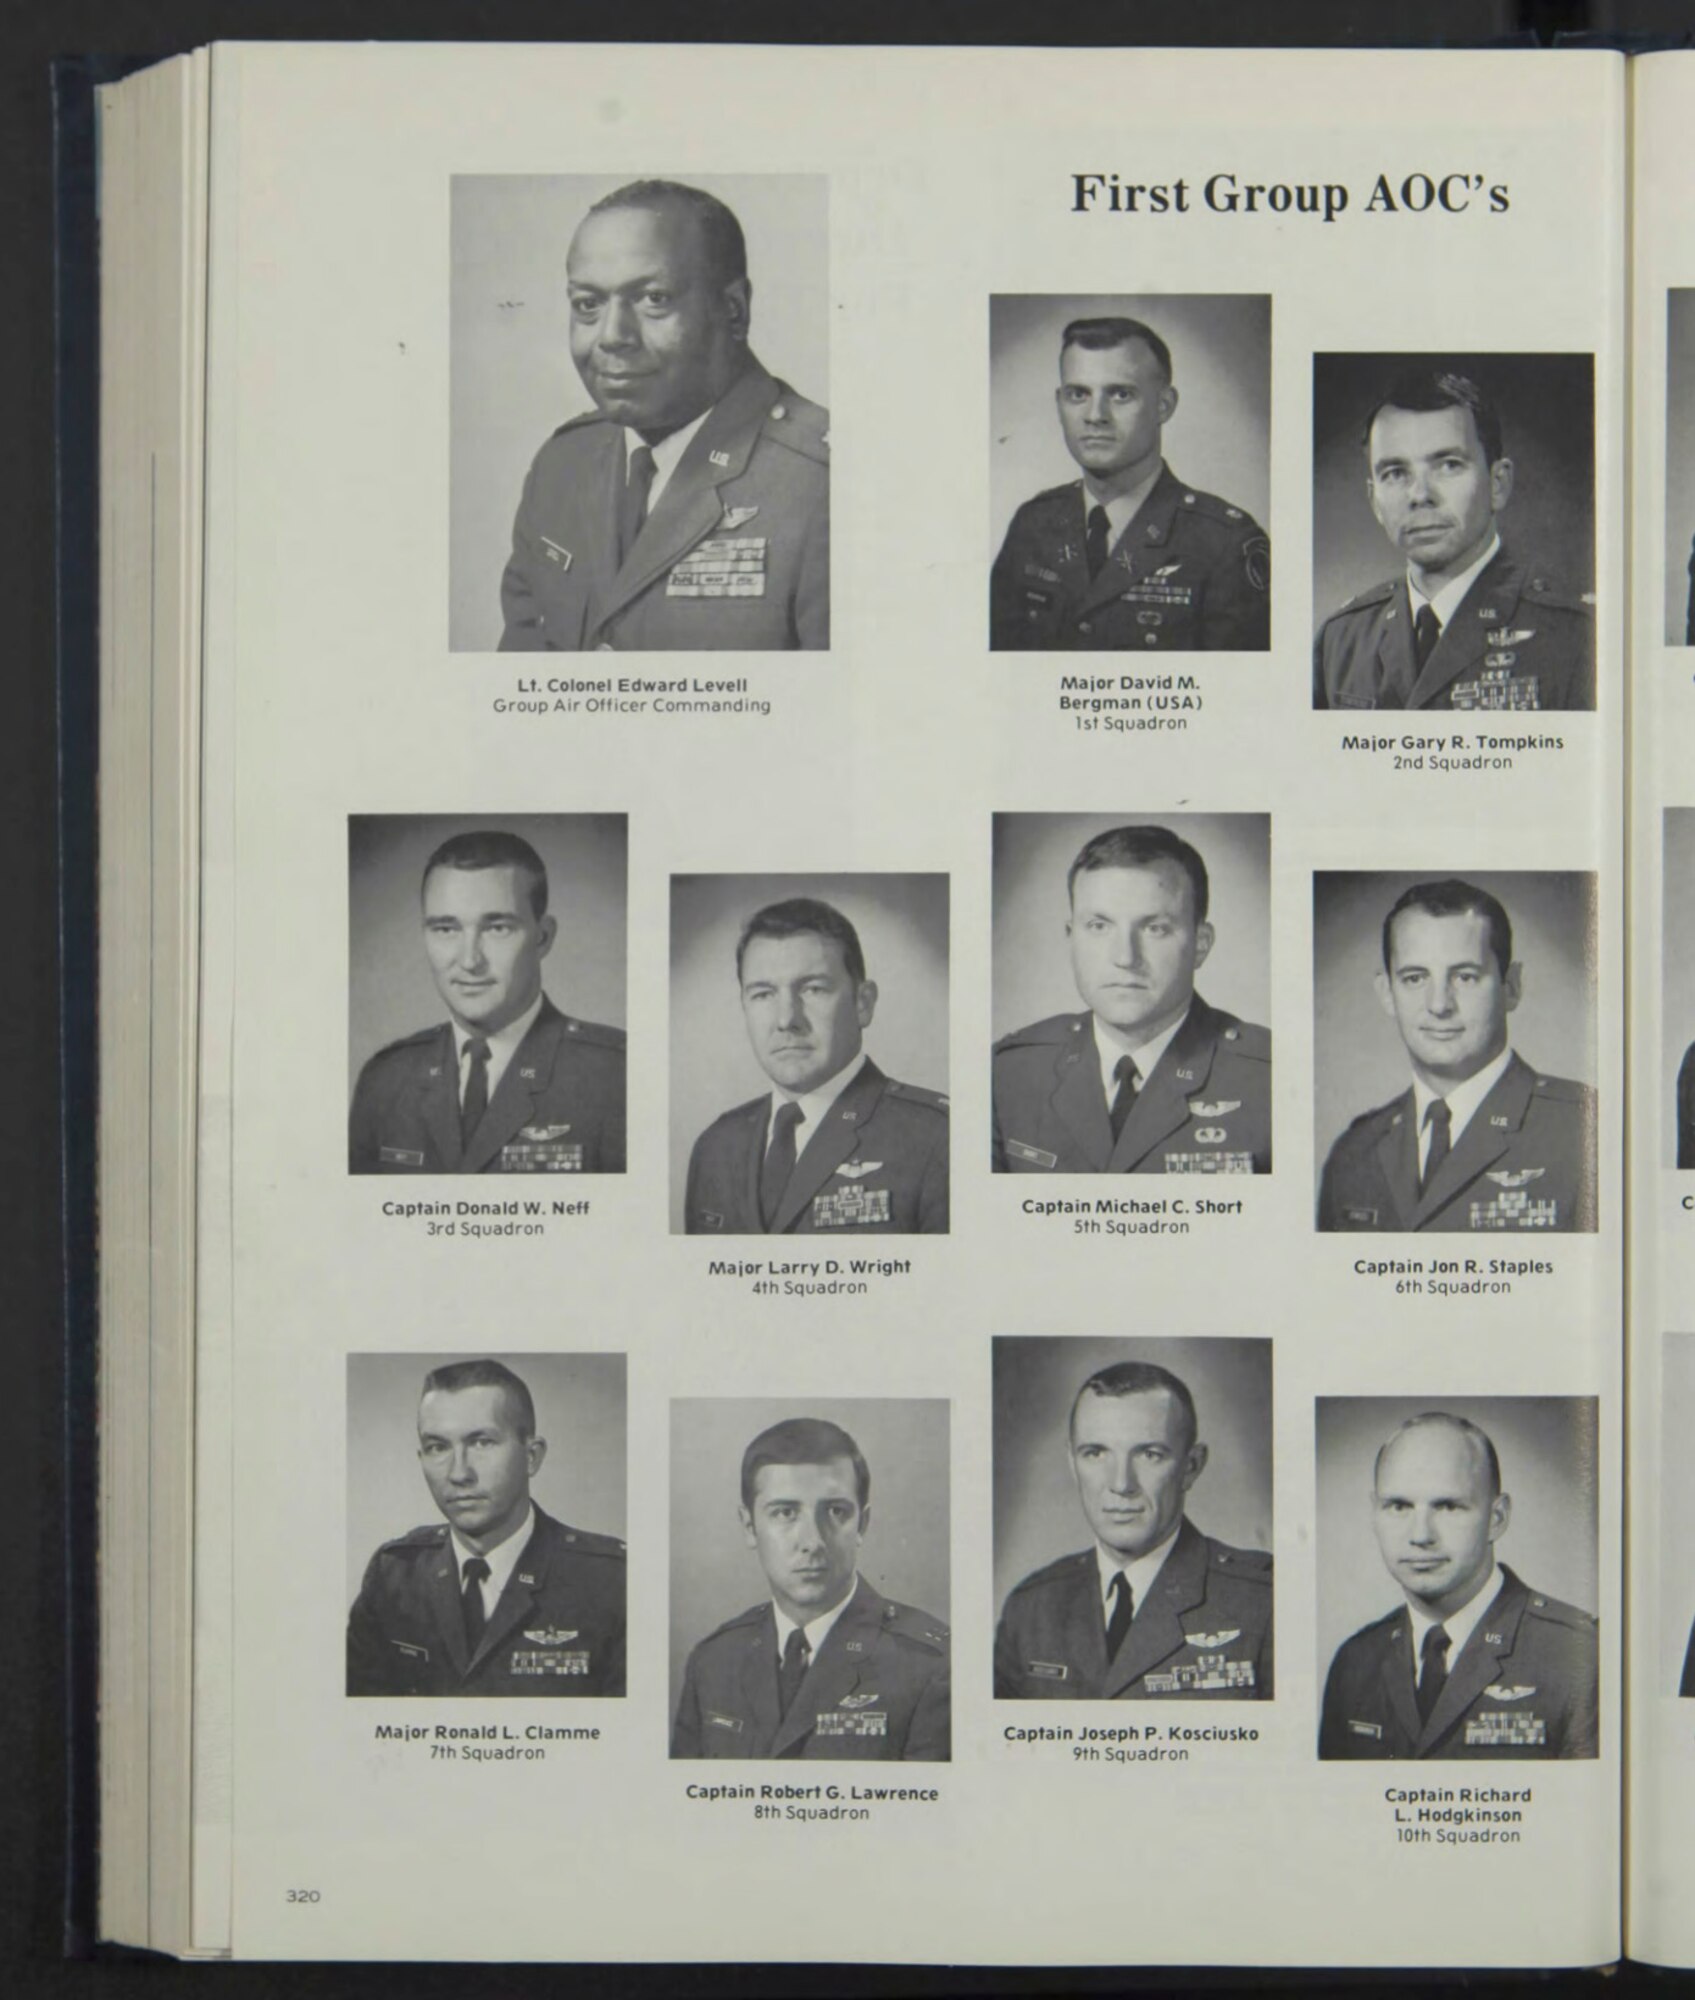 A photo of a yearbook with various people wearing military uniforms.